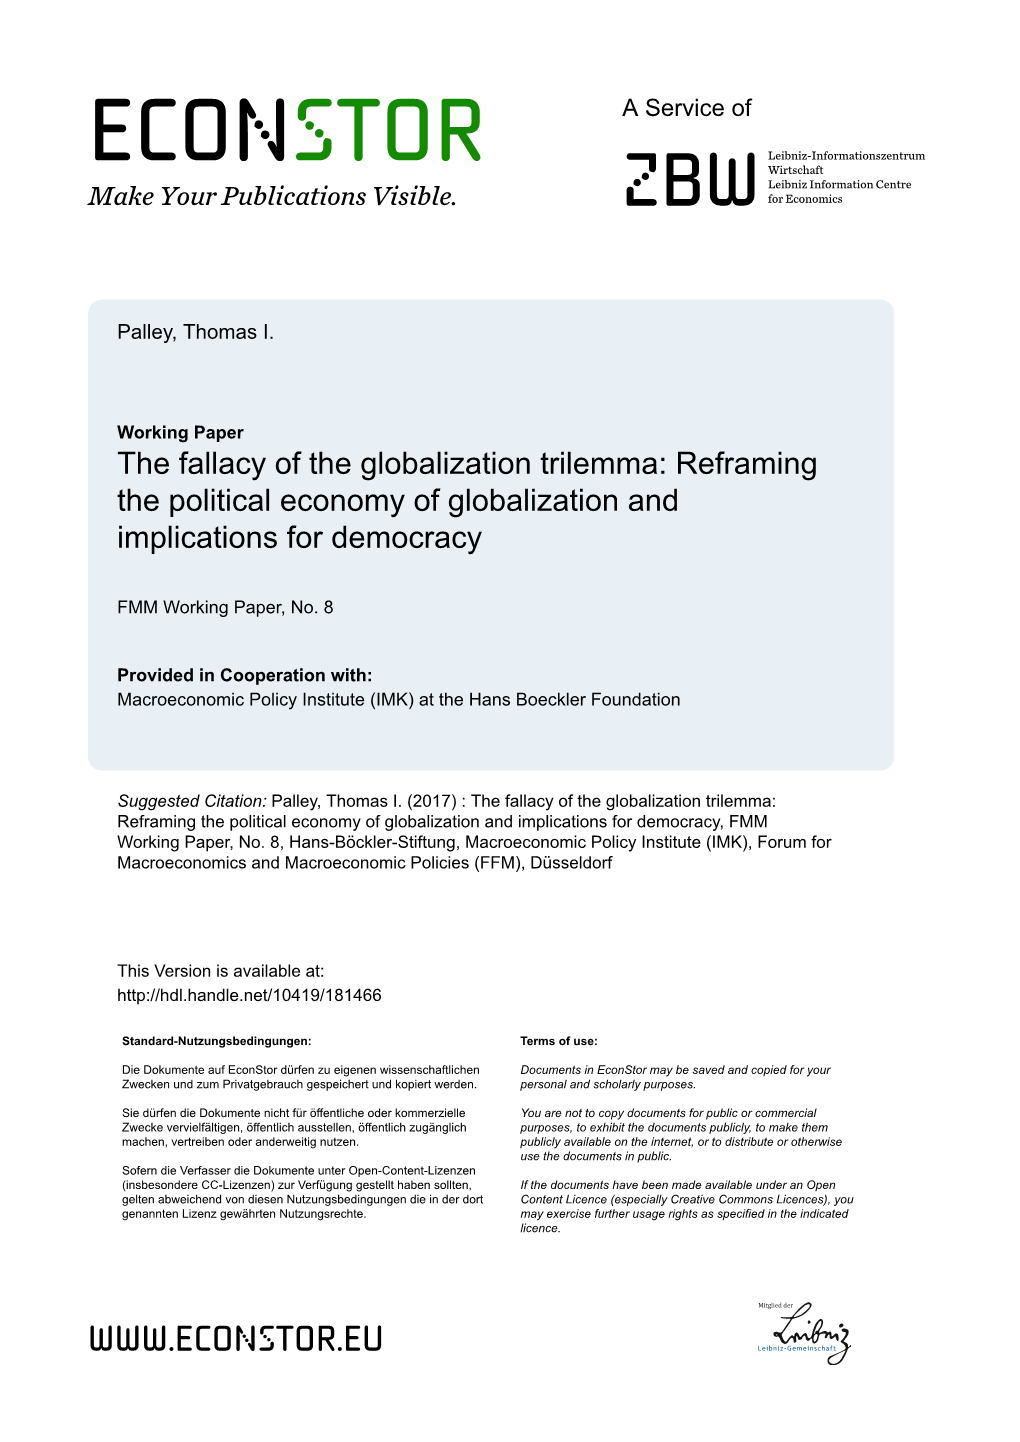 The Fallacy of the Globalization Trilemma: Reframing the Political Economy of Globalization and Implications for Democracy